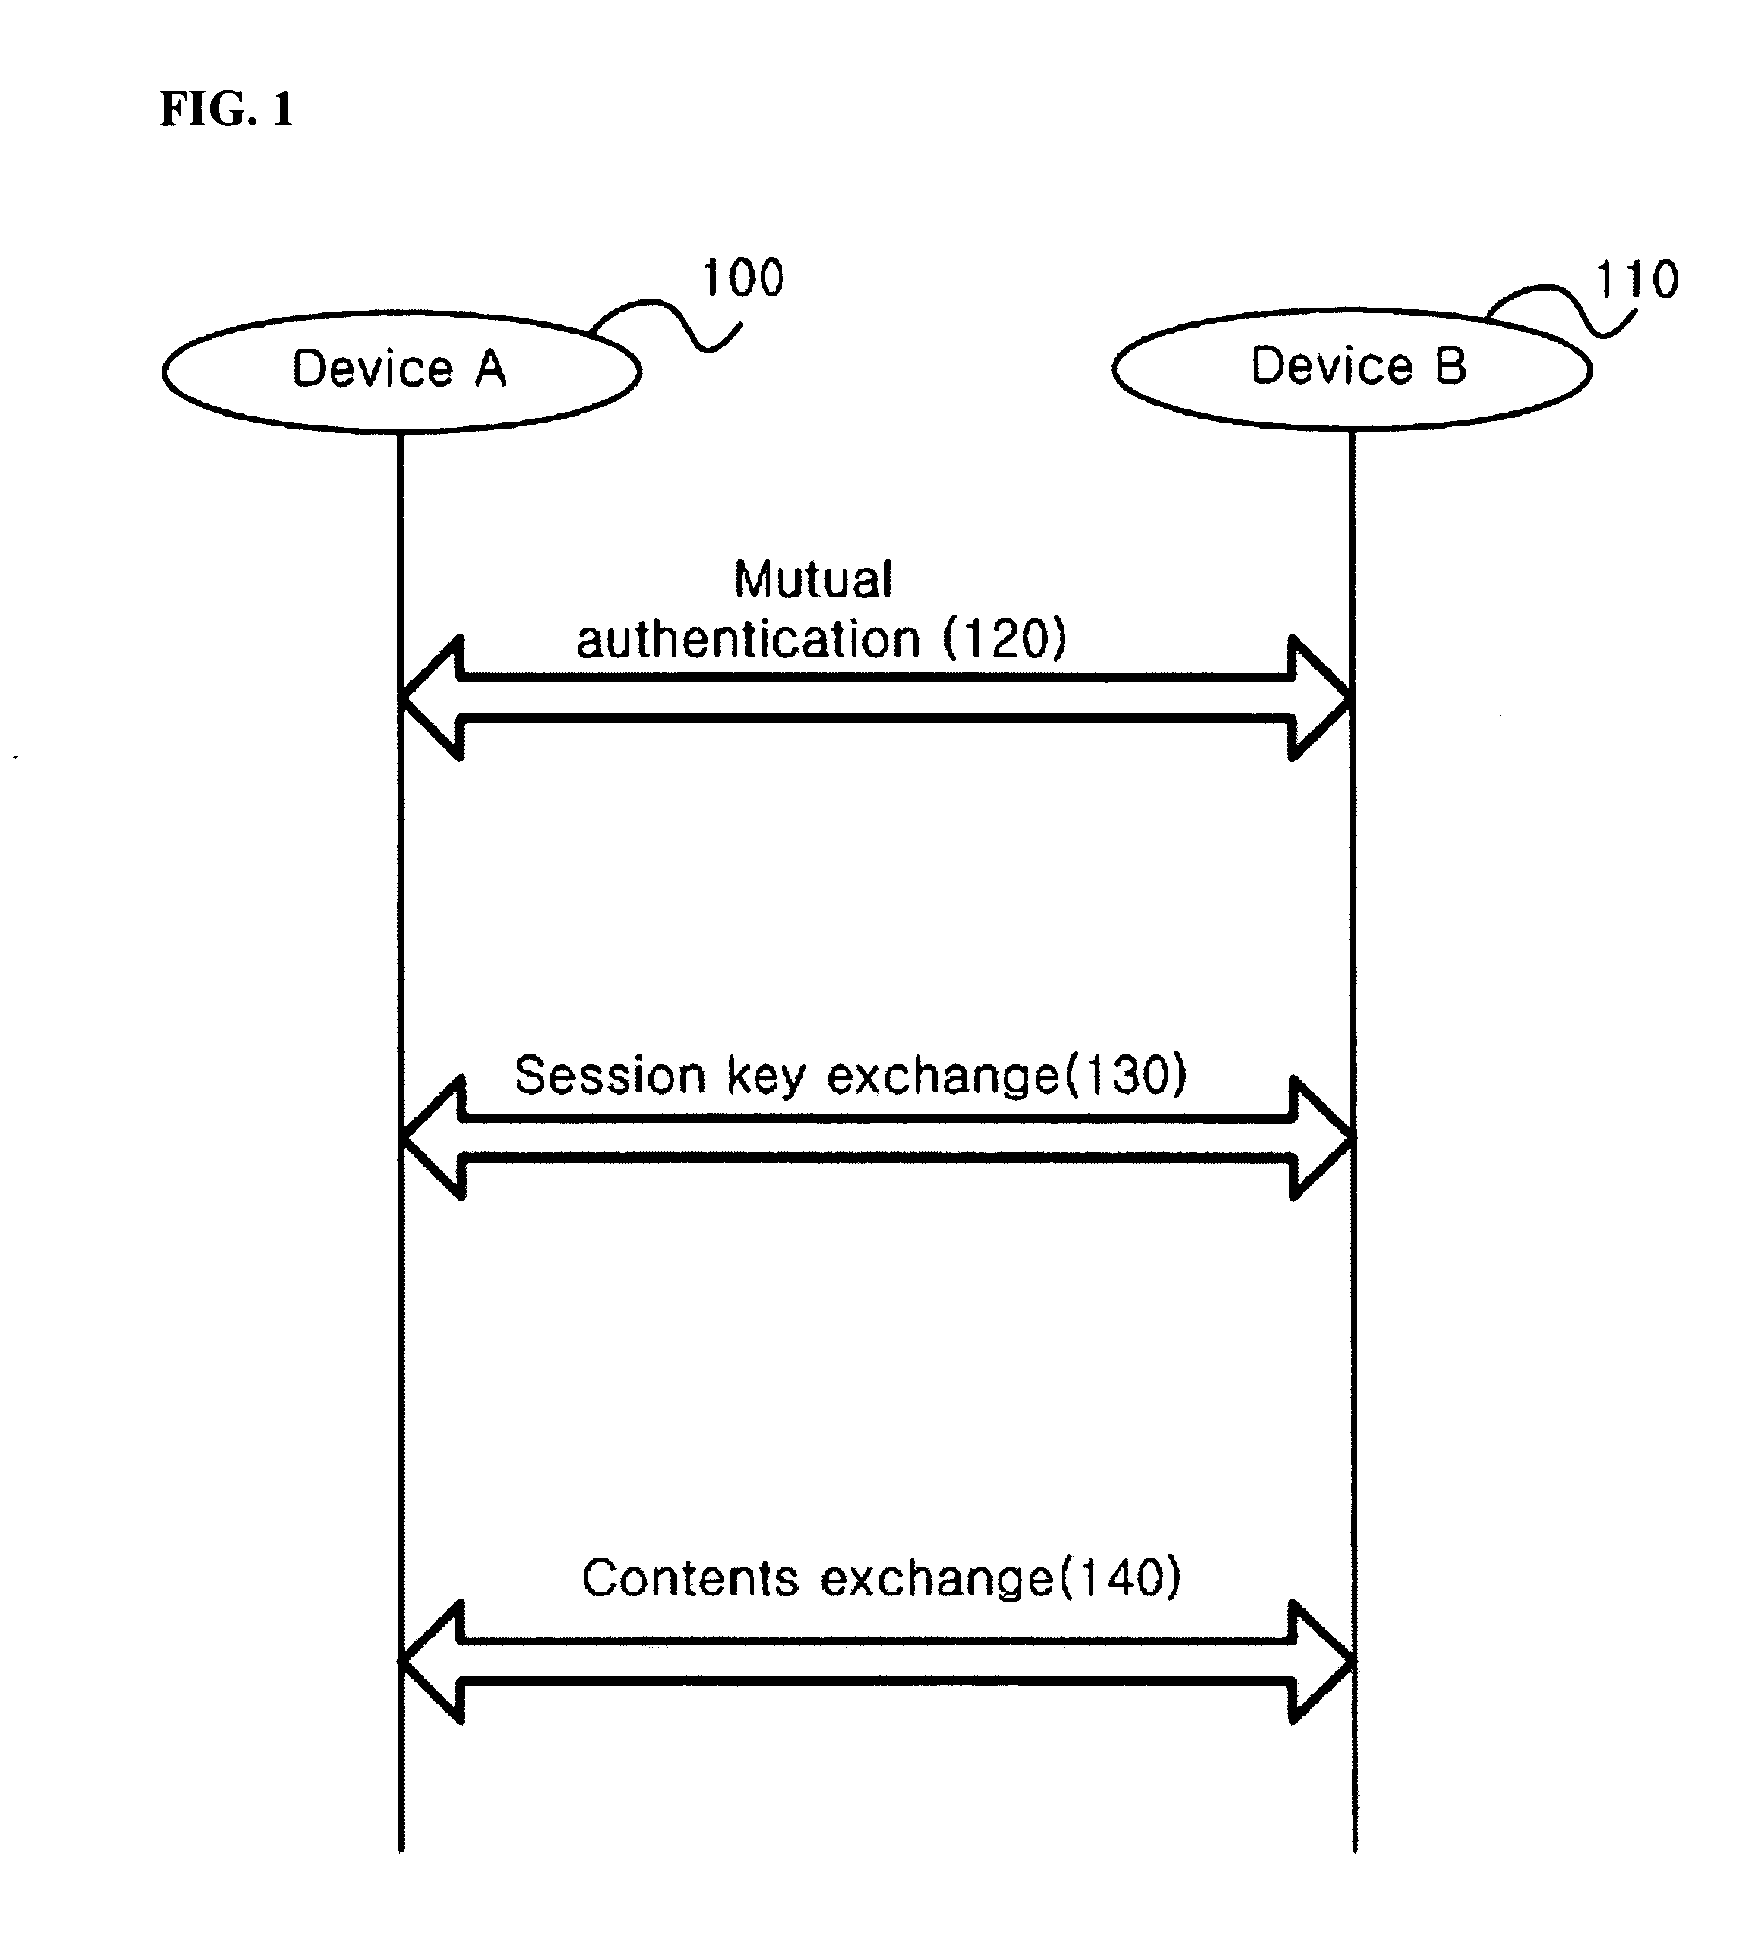 Domain authentication method for exchanging content between devices